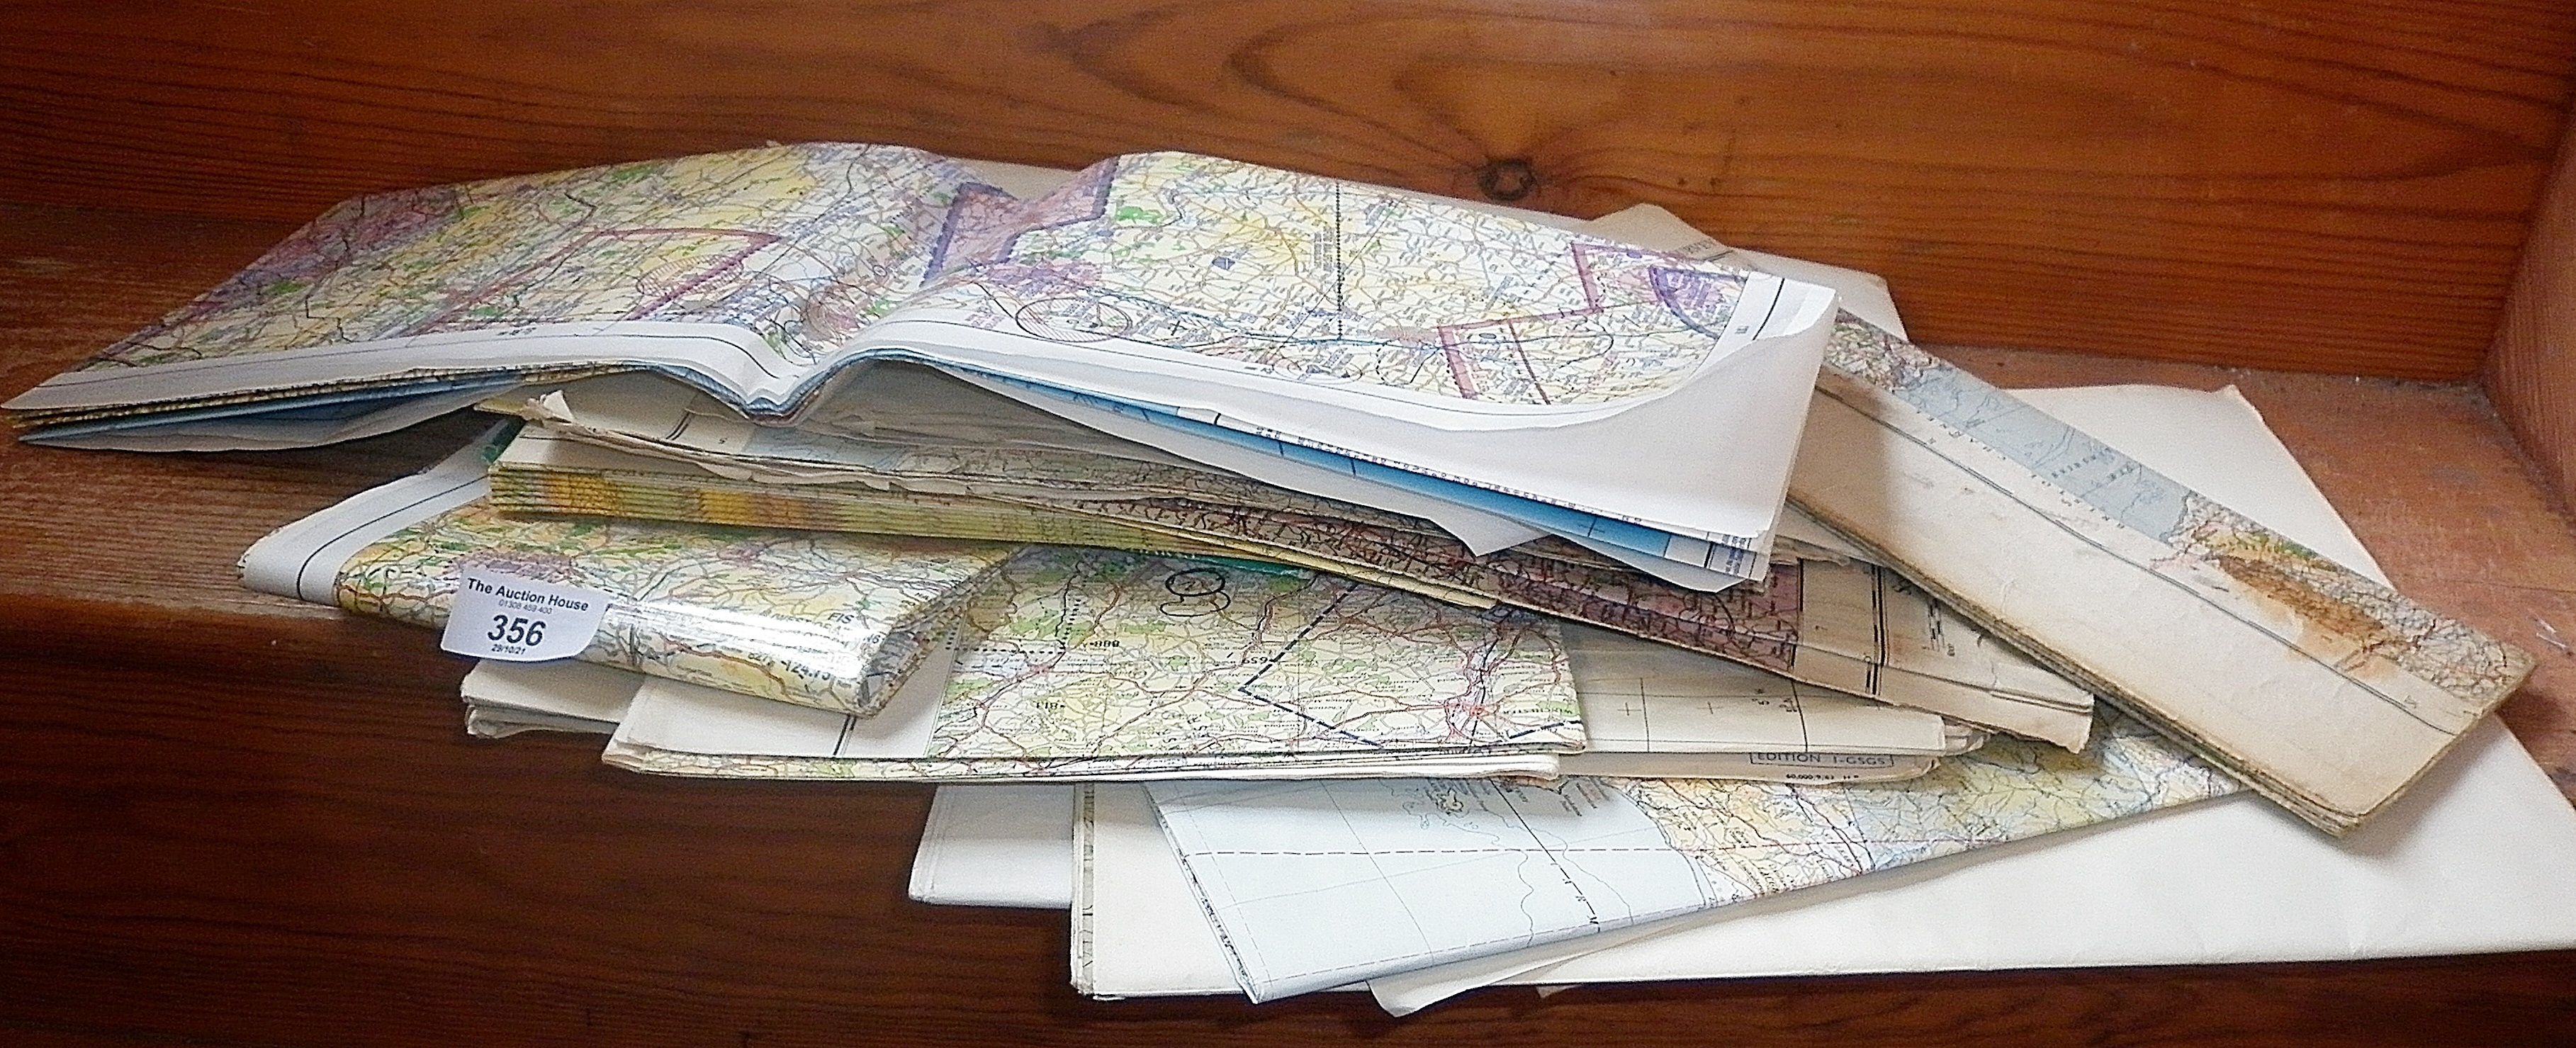 Quantity of Ordnance Survey maps and Topographical Air Charts